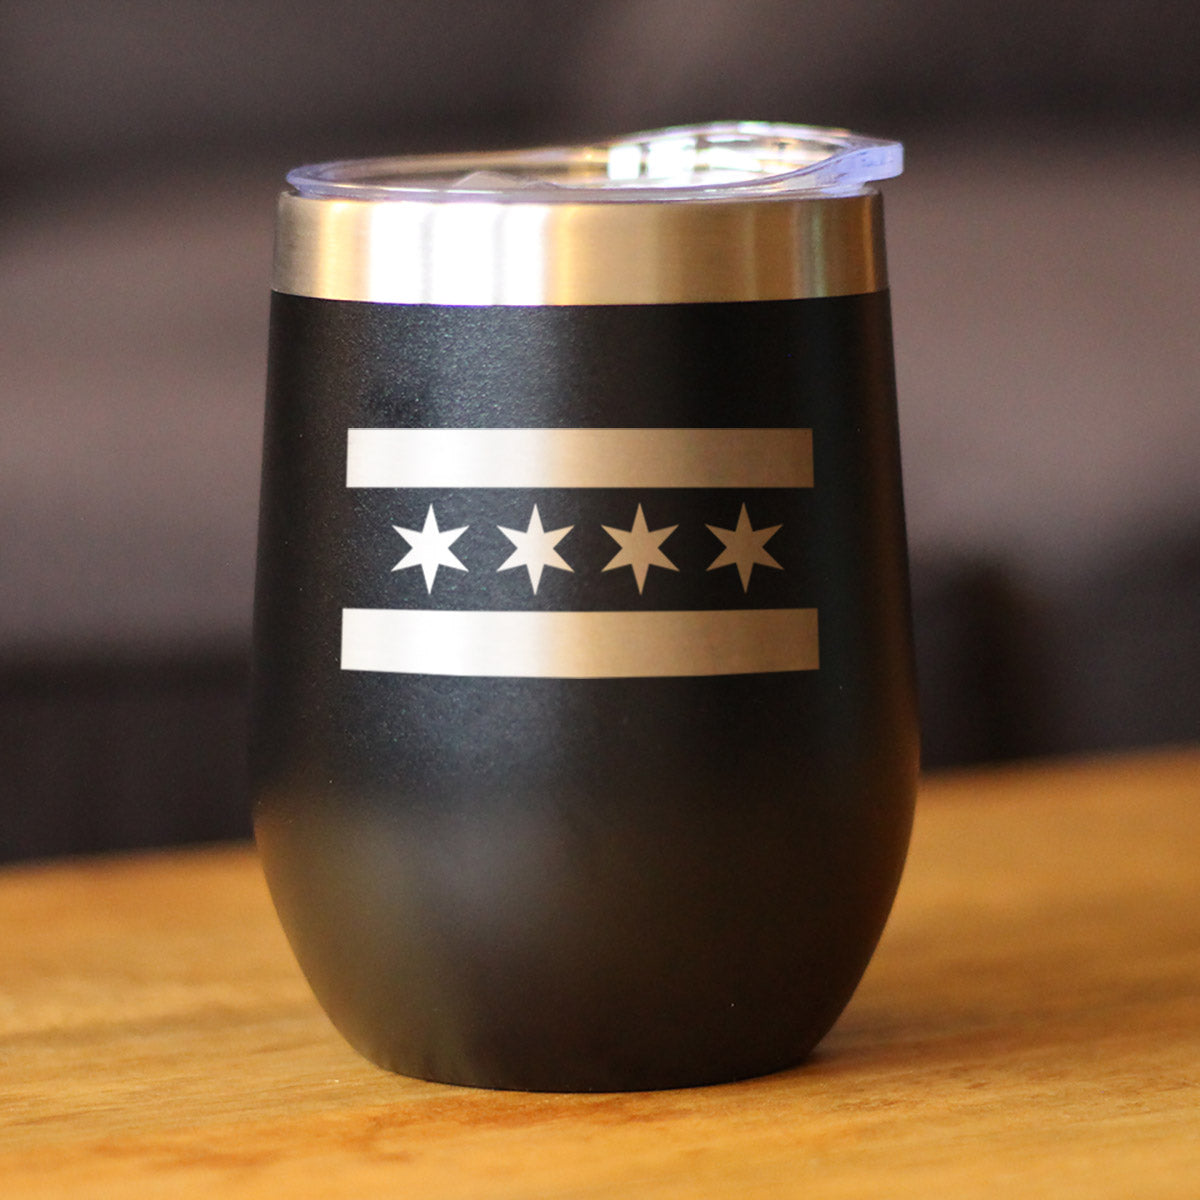 Chicago Flag - Wine Tumbler Glass with Sliding Lid - Stainless Steel Insulated Mug - Cute Windy City Themed Gift for Men and Women